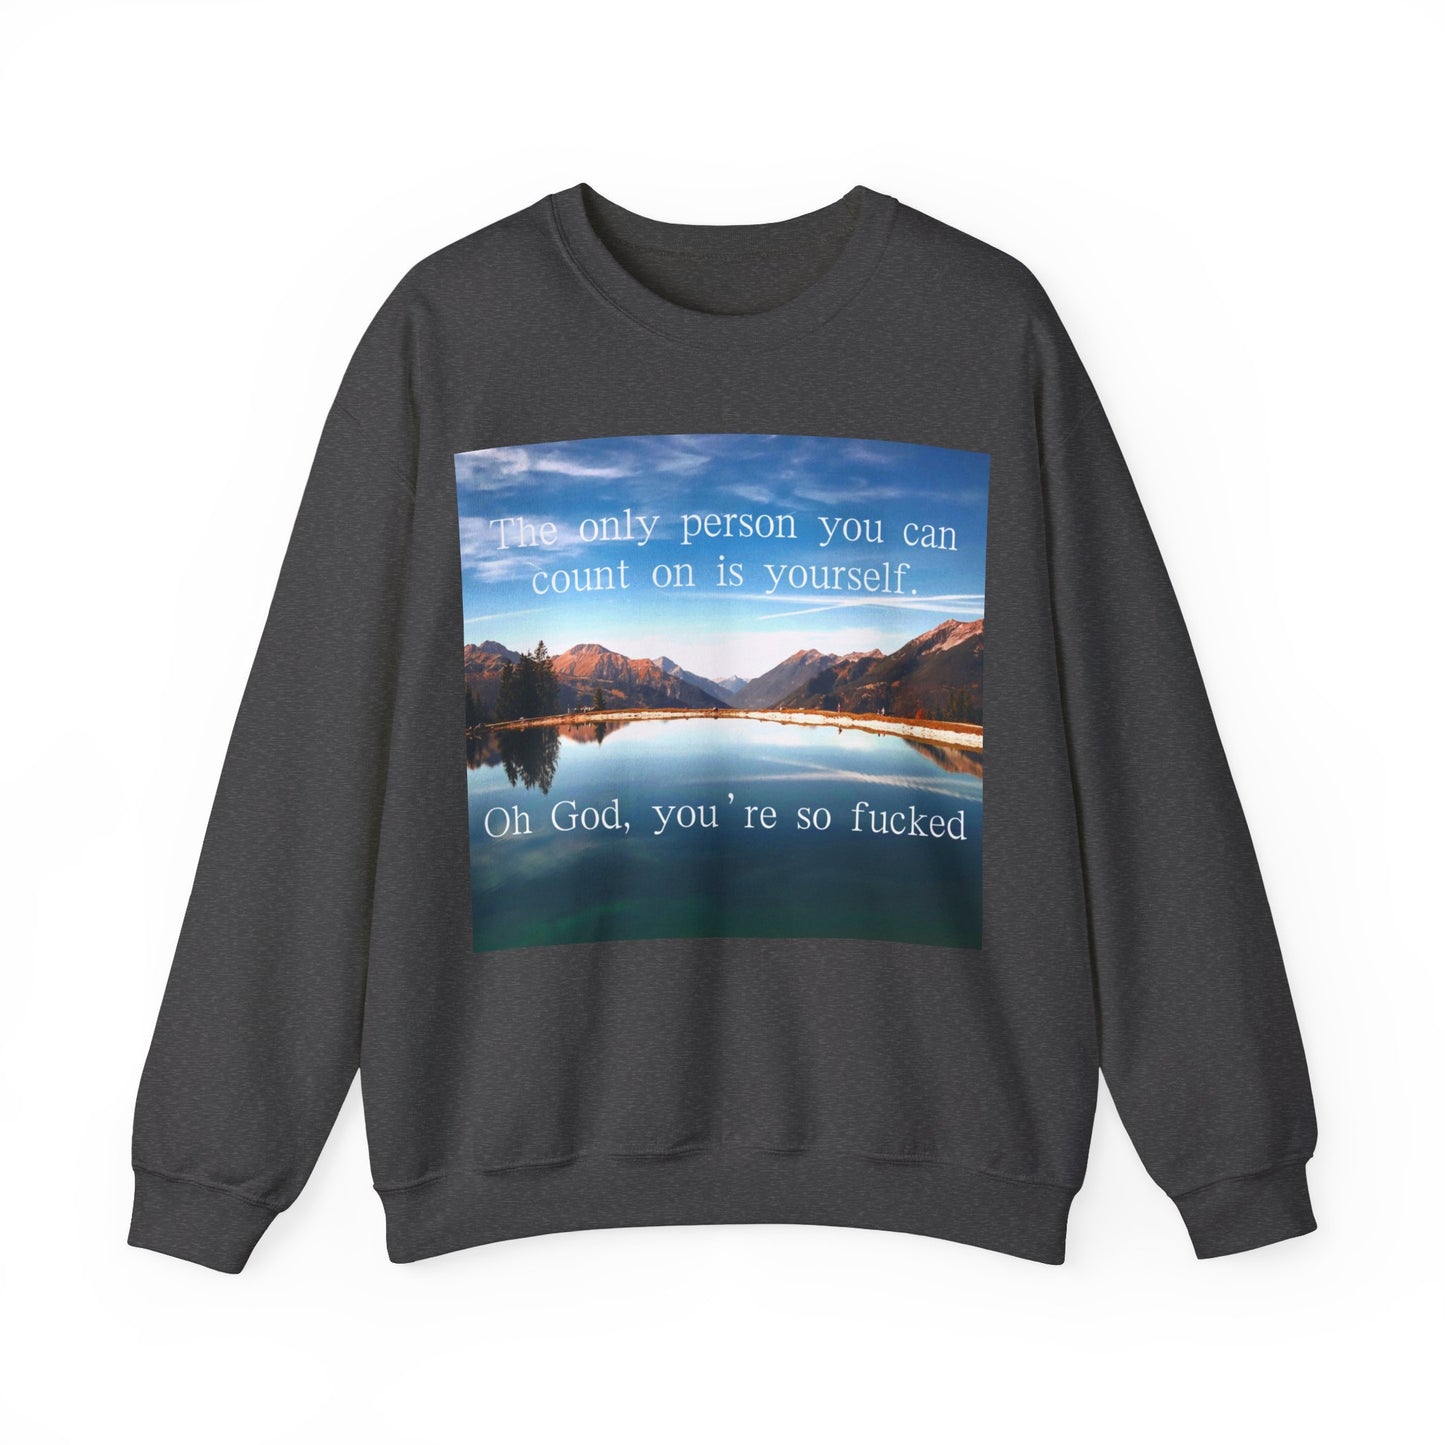 The only person you can count on is yourself Sweatshirt